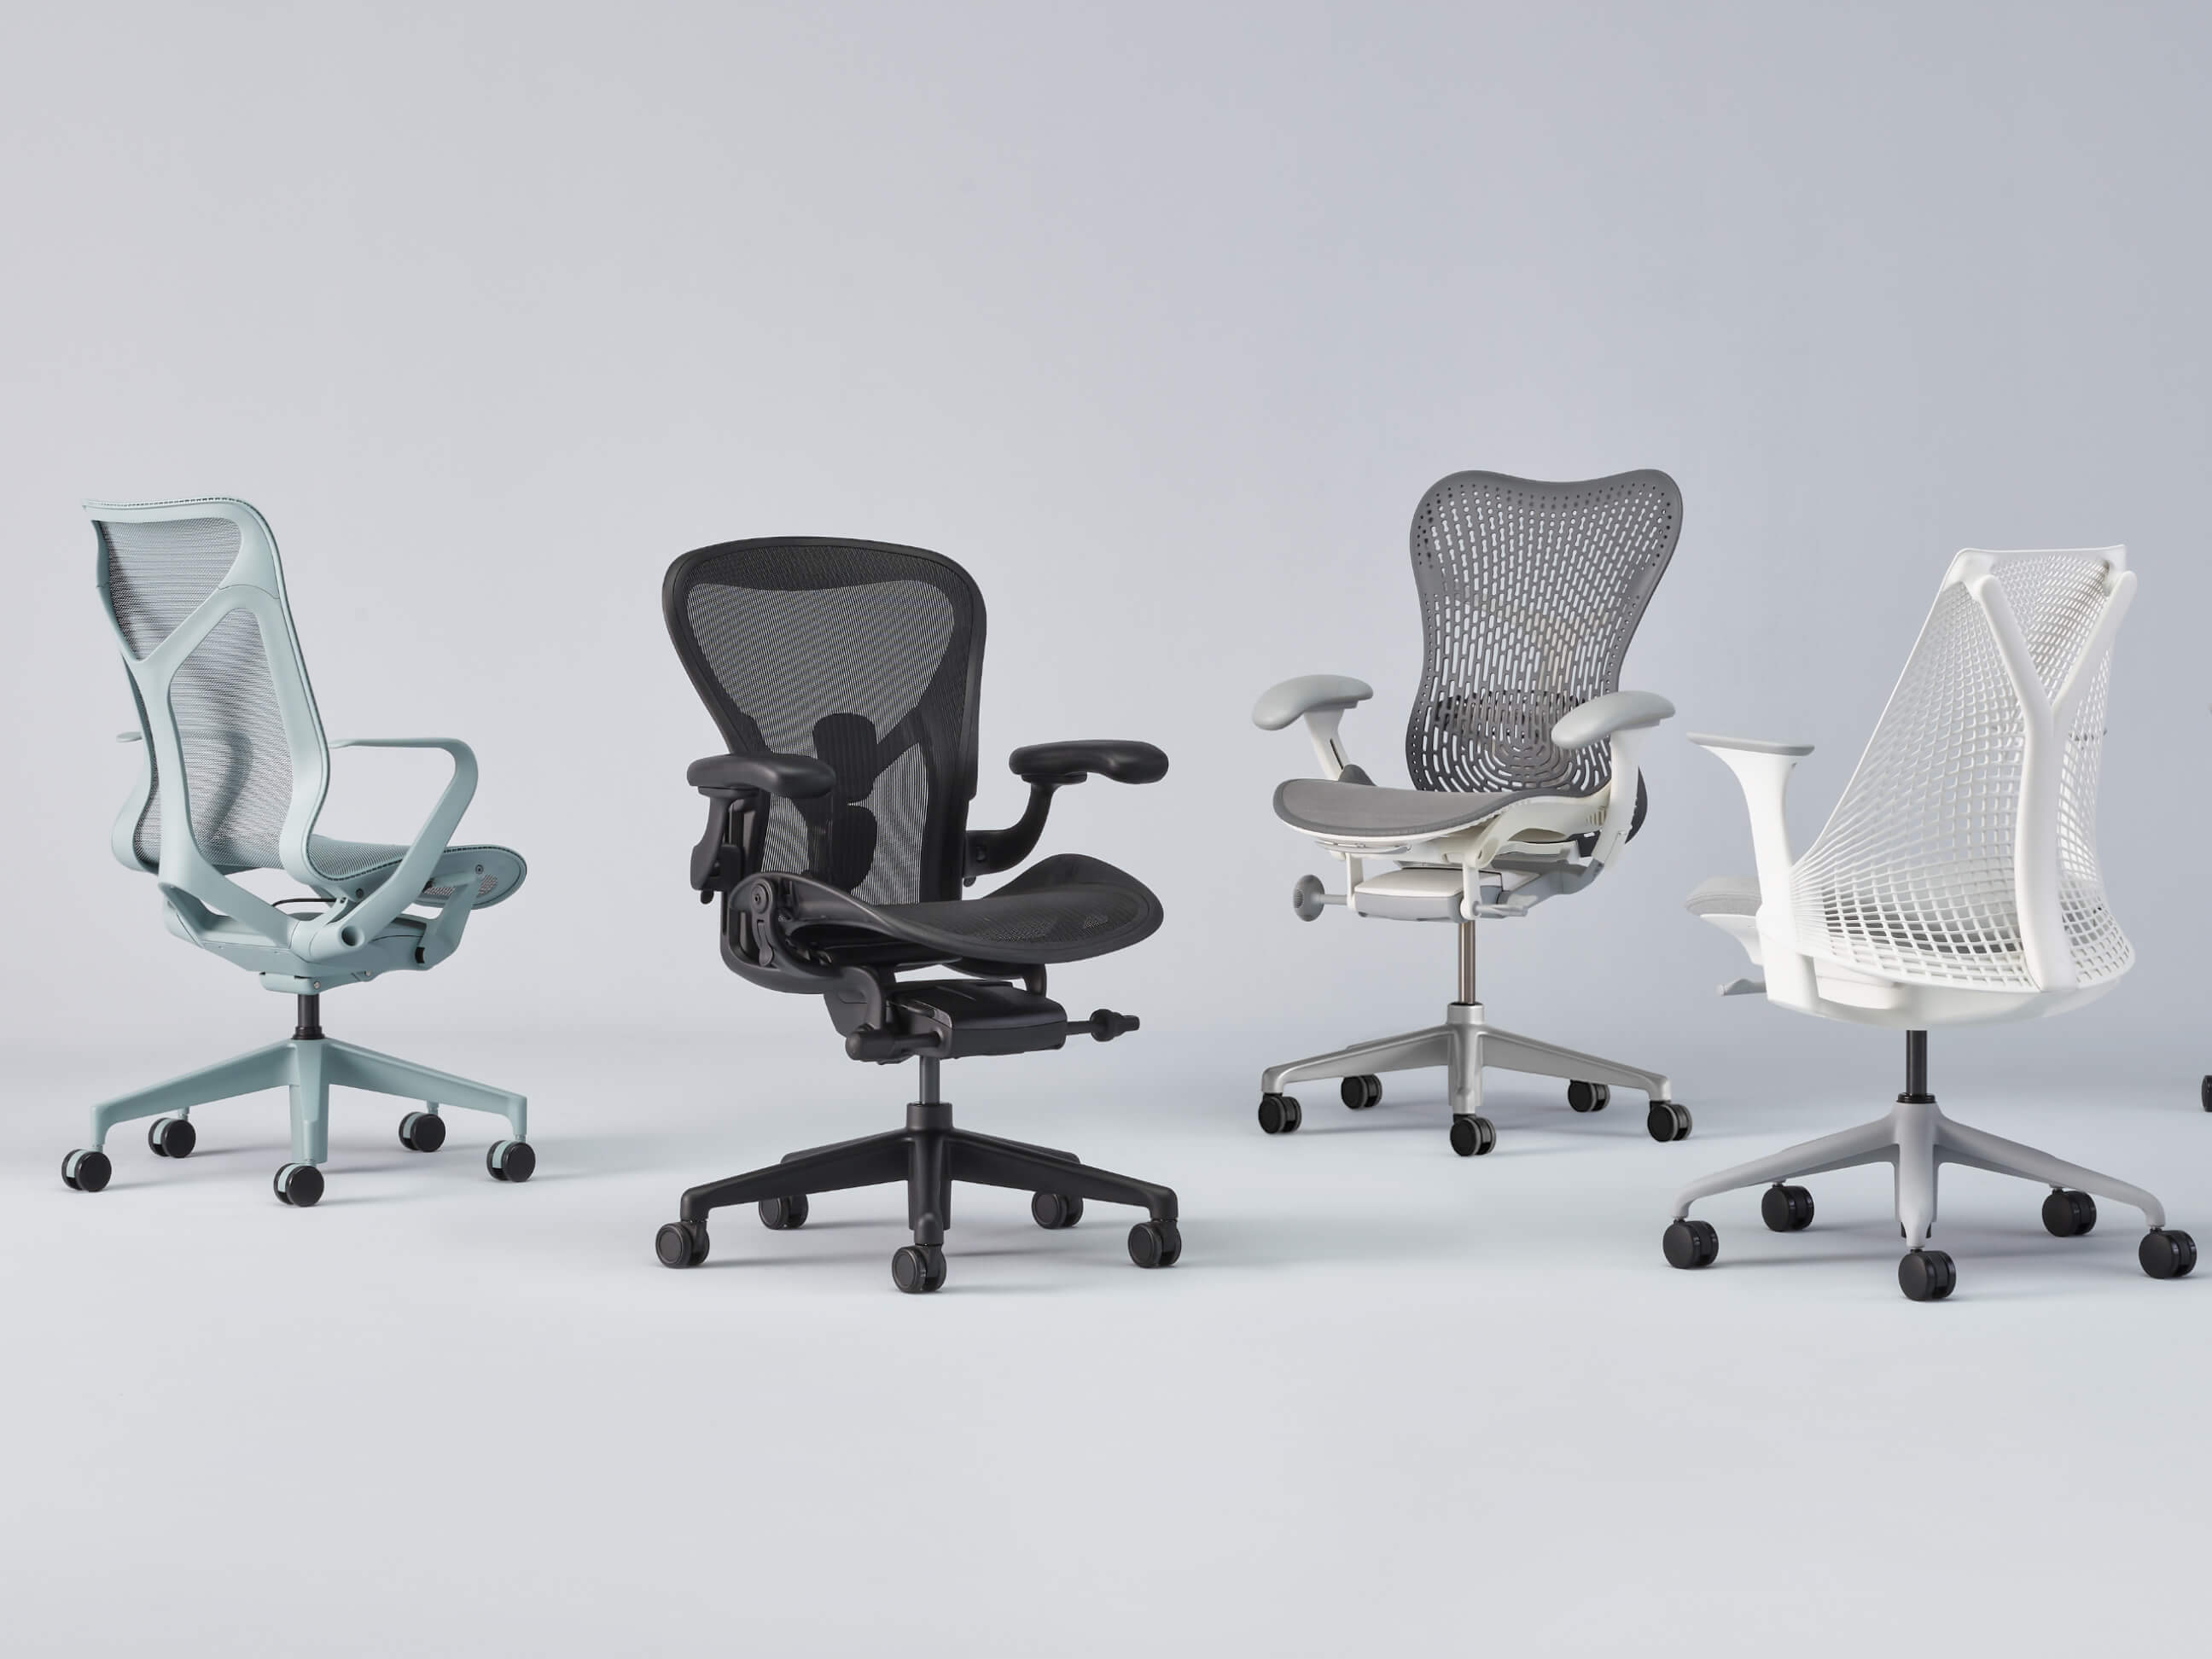 Herman Miller’s collection of comfortable and enduring ergonomic office chairs—from Aeron to Sayl.